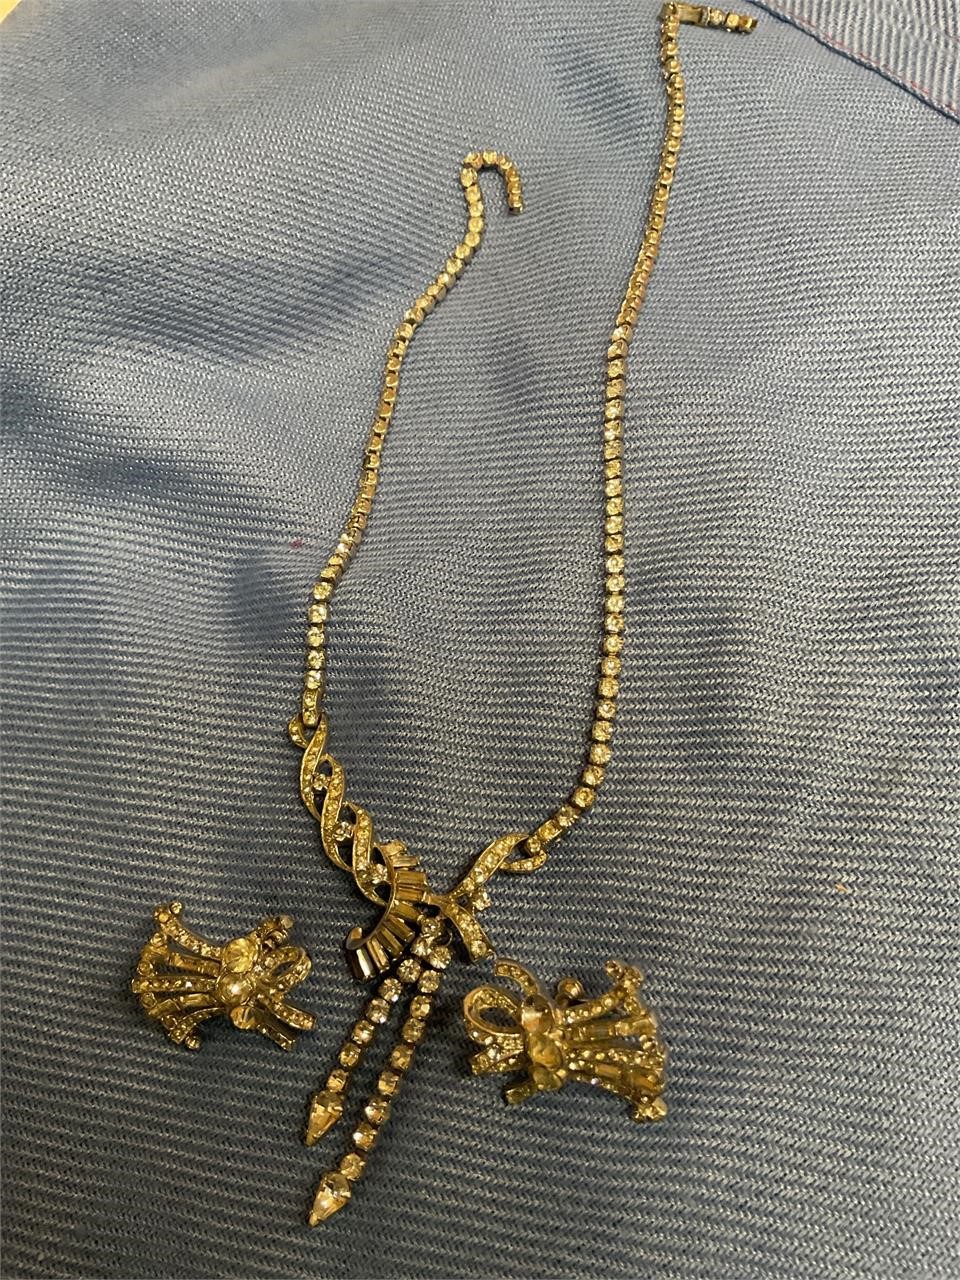 Vintage necklace and earrings